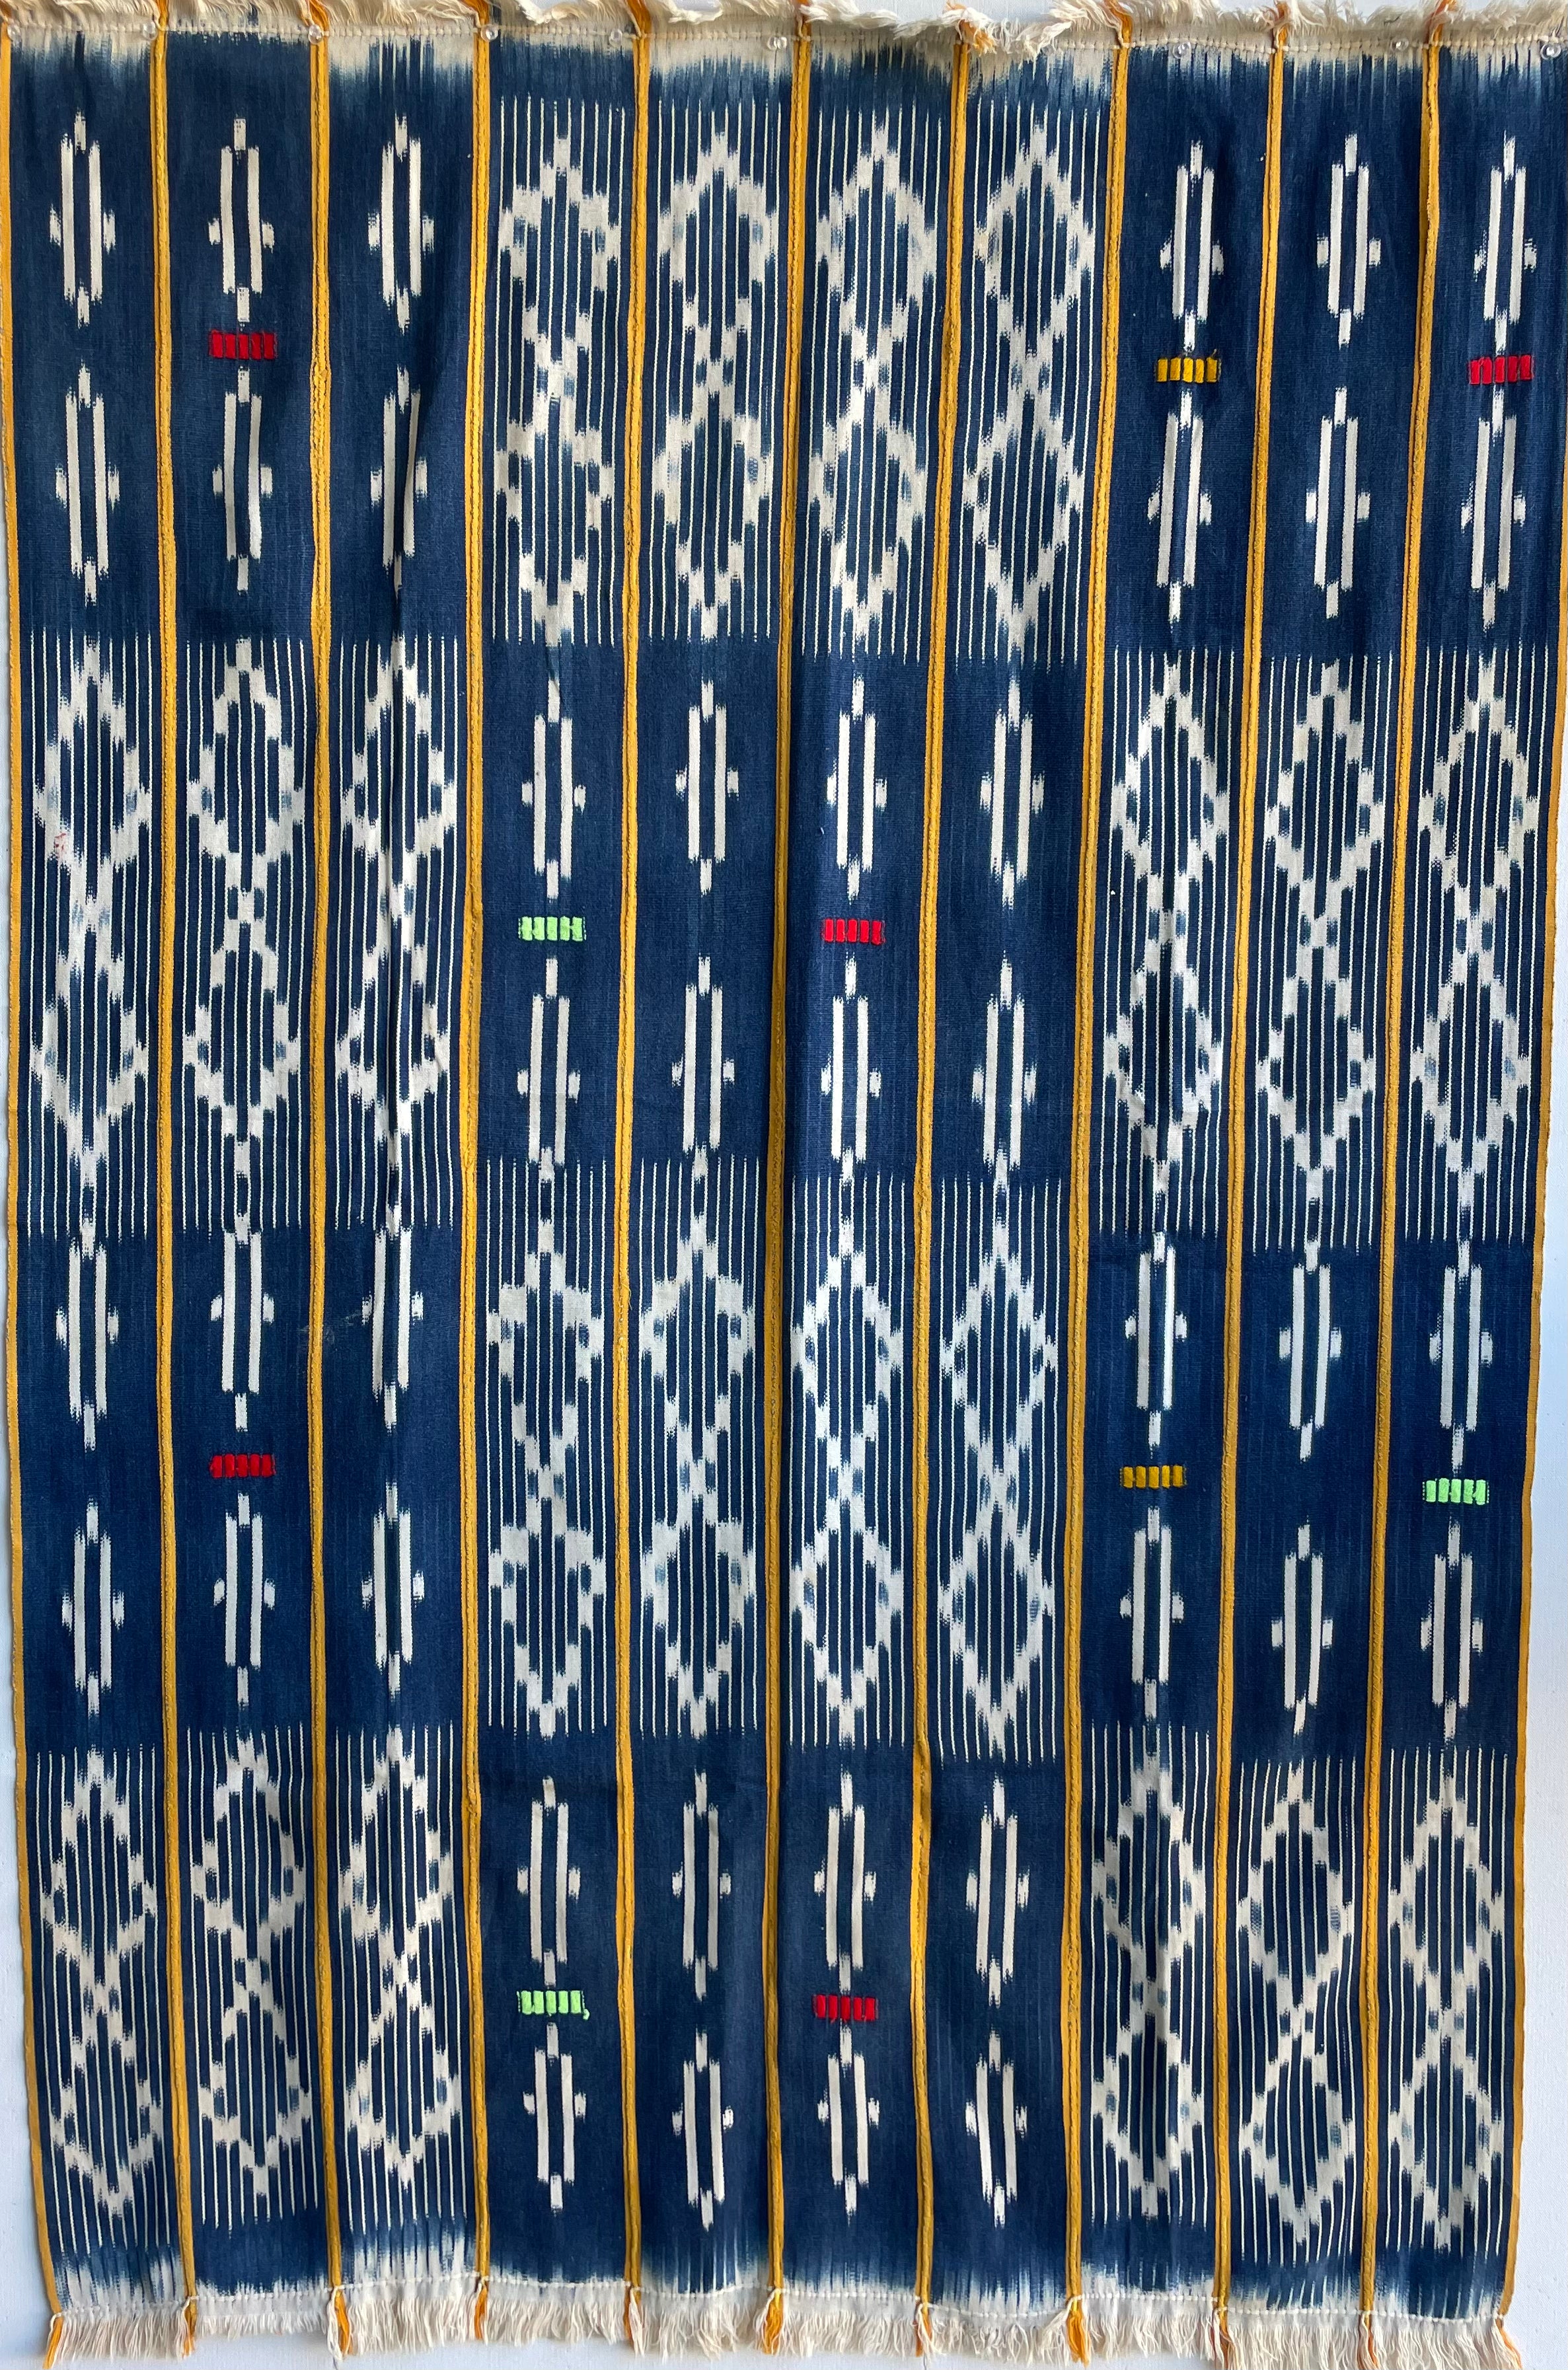 Handcrafted Textiles - Handmade - Vintage -  African Art - Home Decor - Living Room - Indigo Dyed  - Cotton - Baule Ikat - Tie Dye Cloth